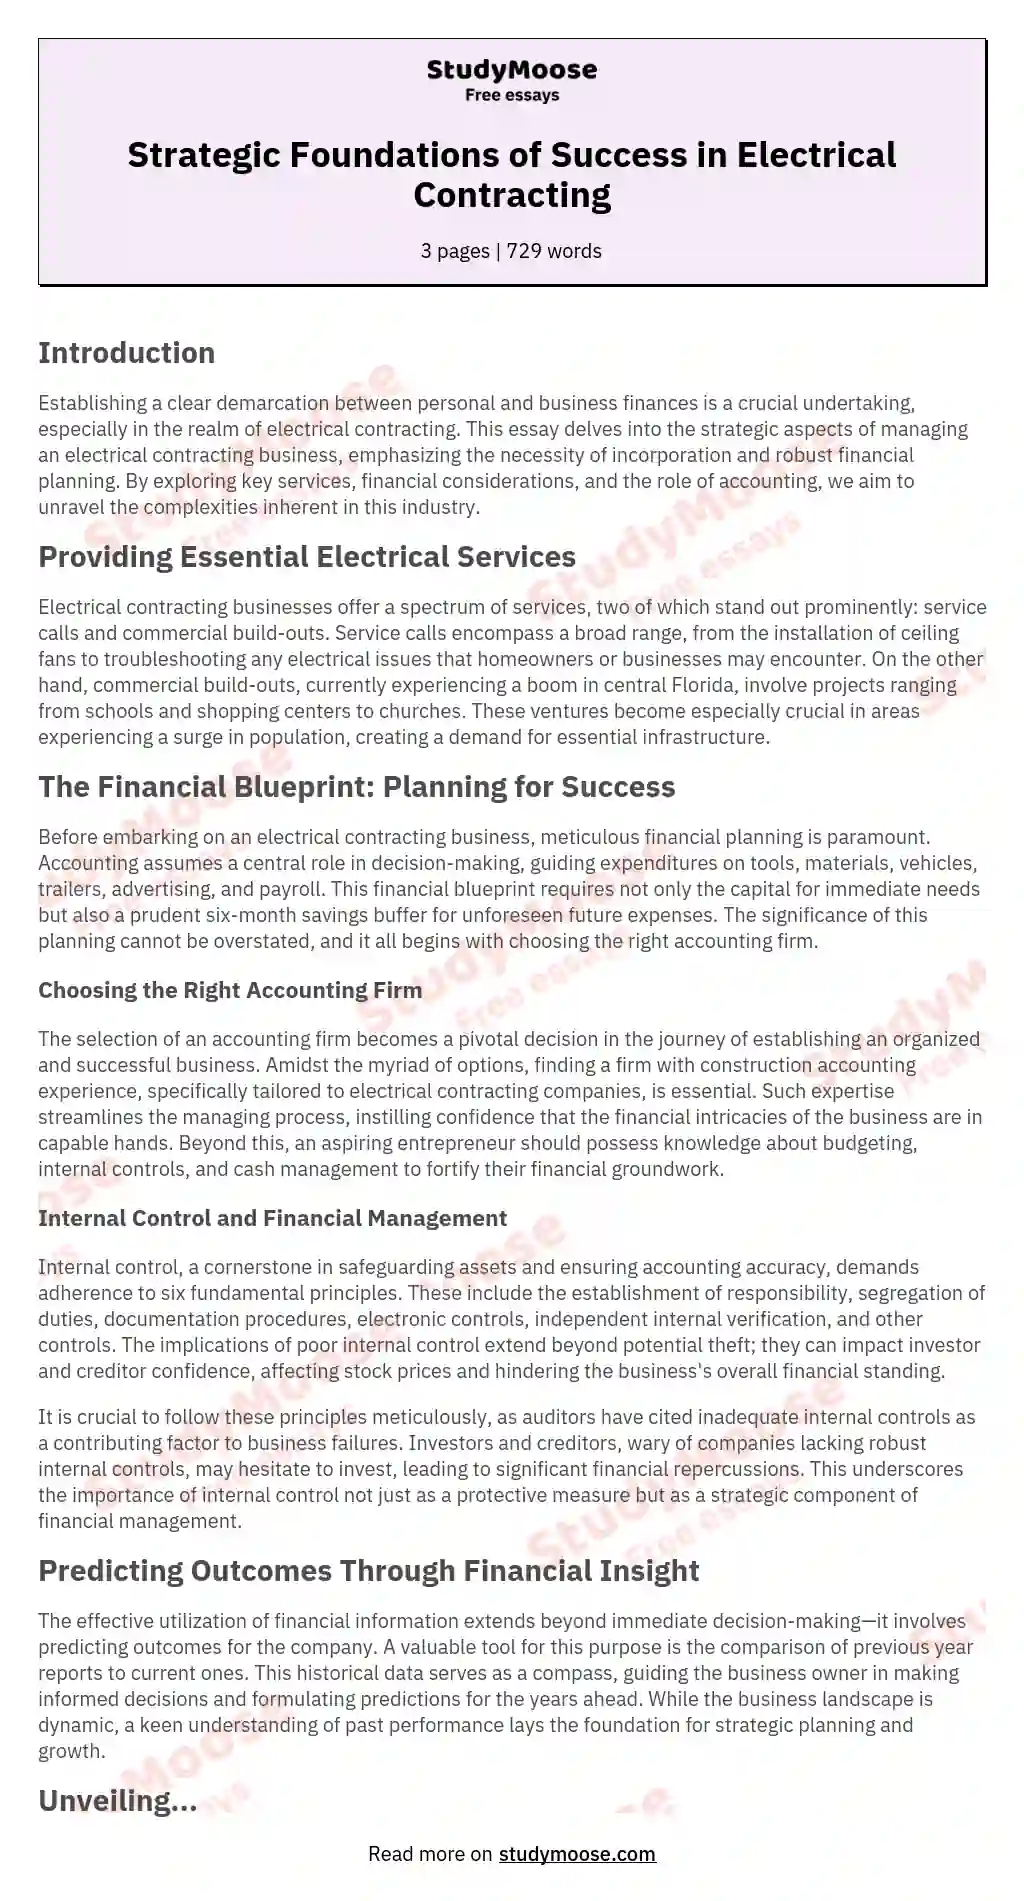 Strategic Foundations of Success in Electrical Contracting essay